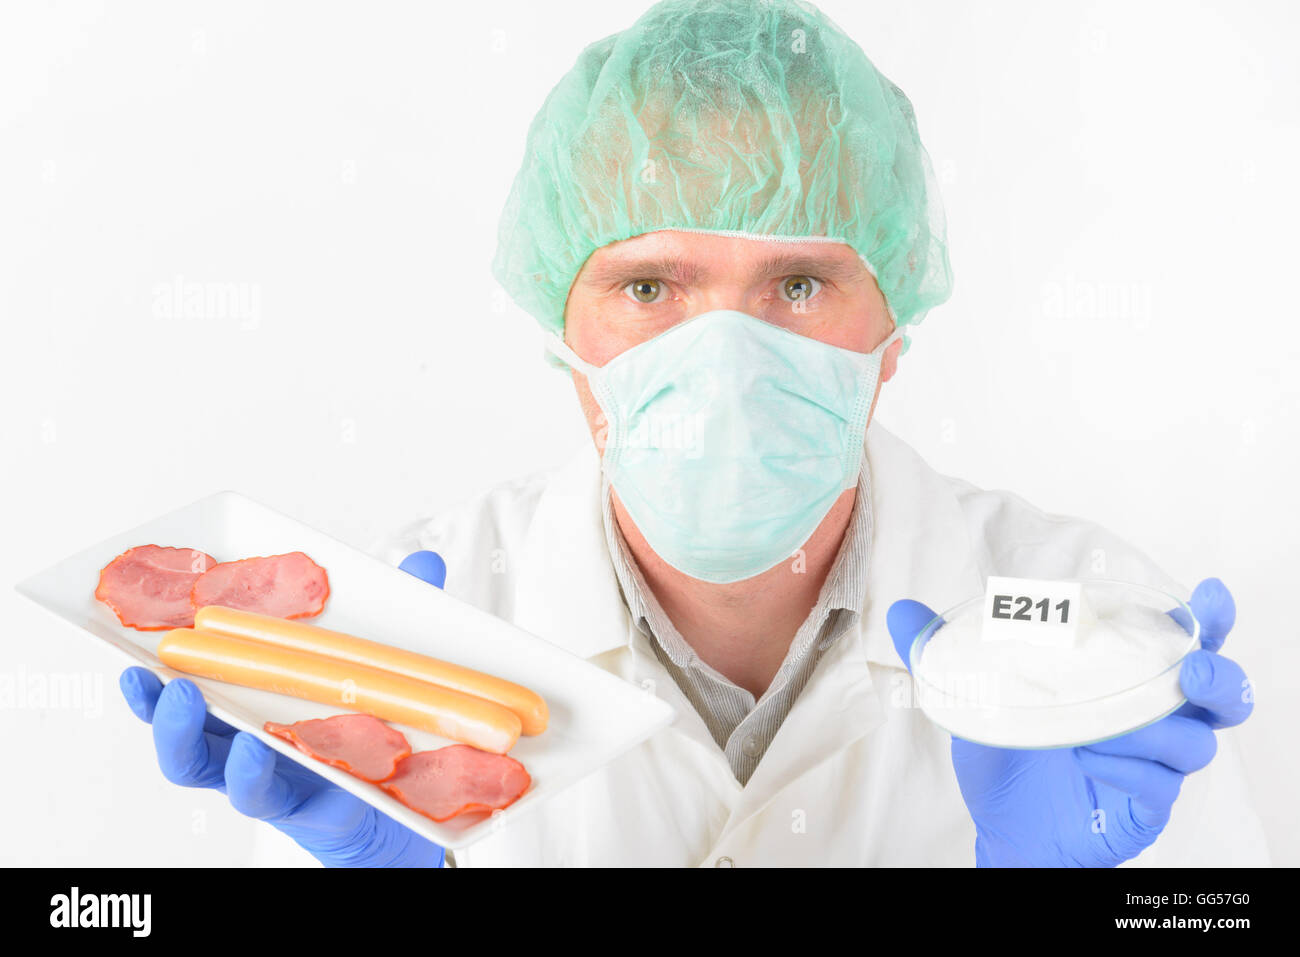 Researcher presenting preservatives substances that are added to products such as foods, pharmaceuticals, paints, biological sam Stock Photo